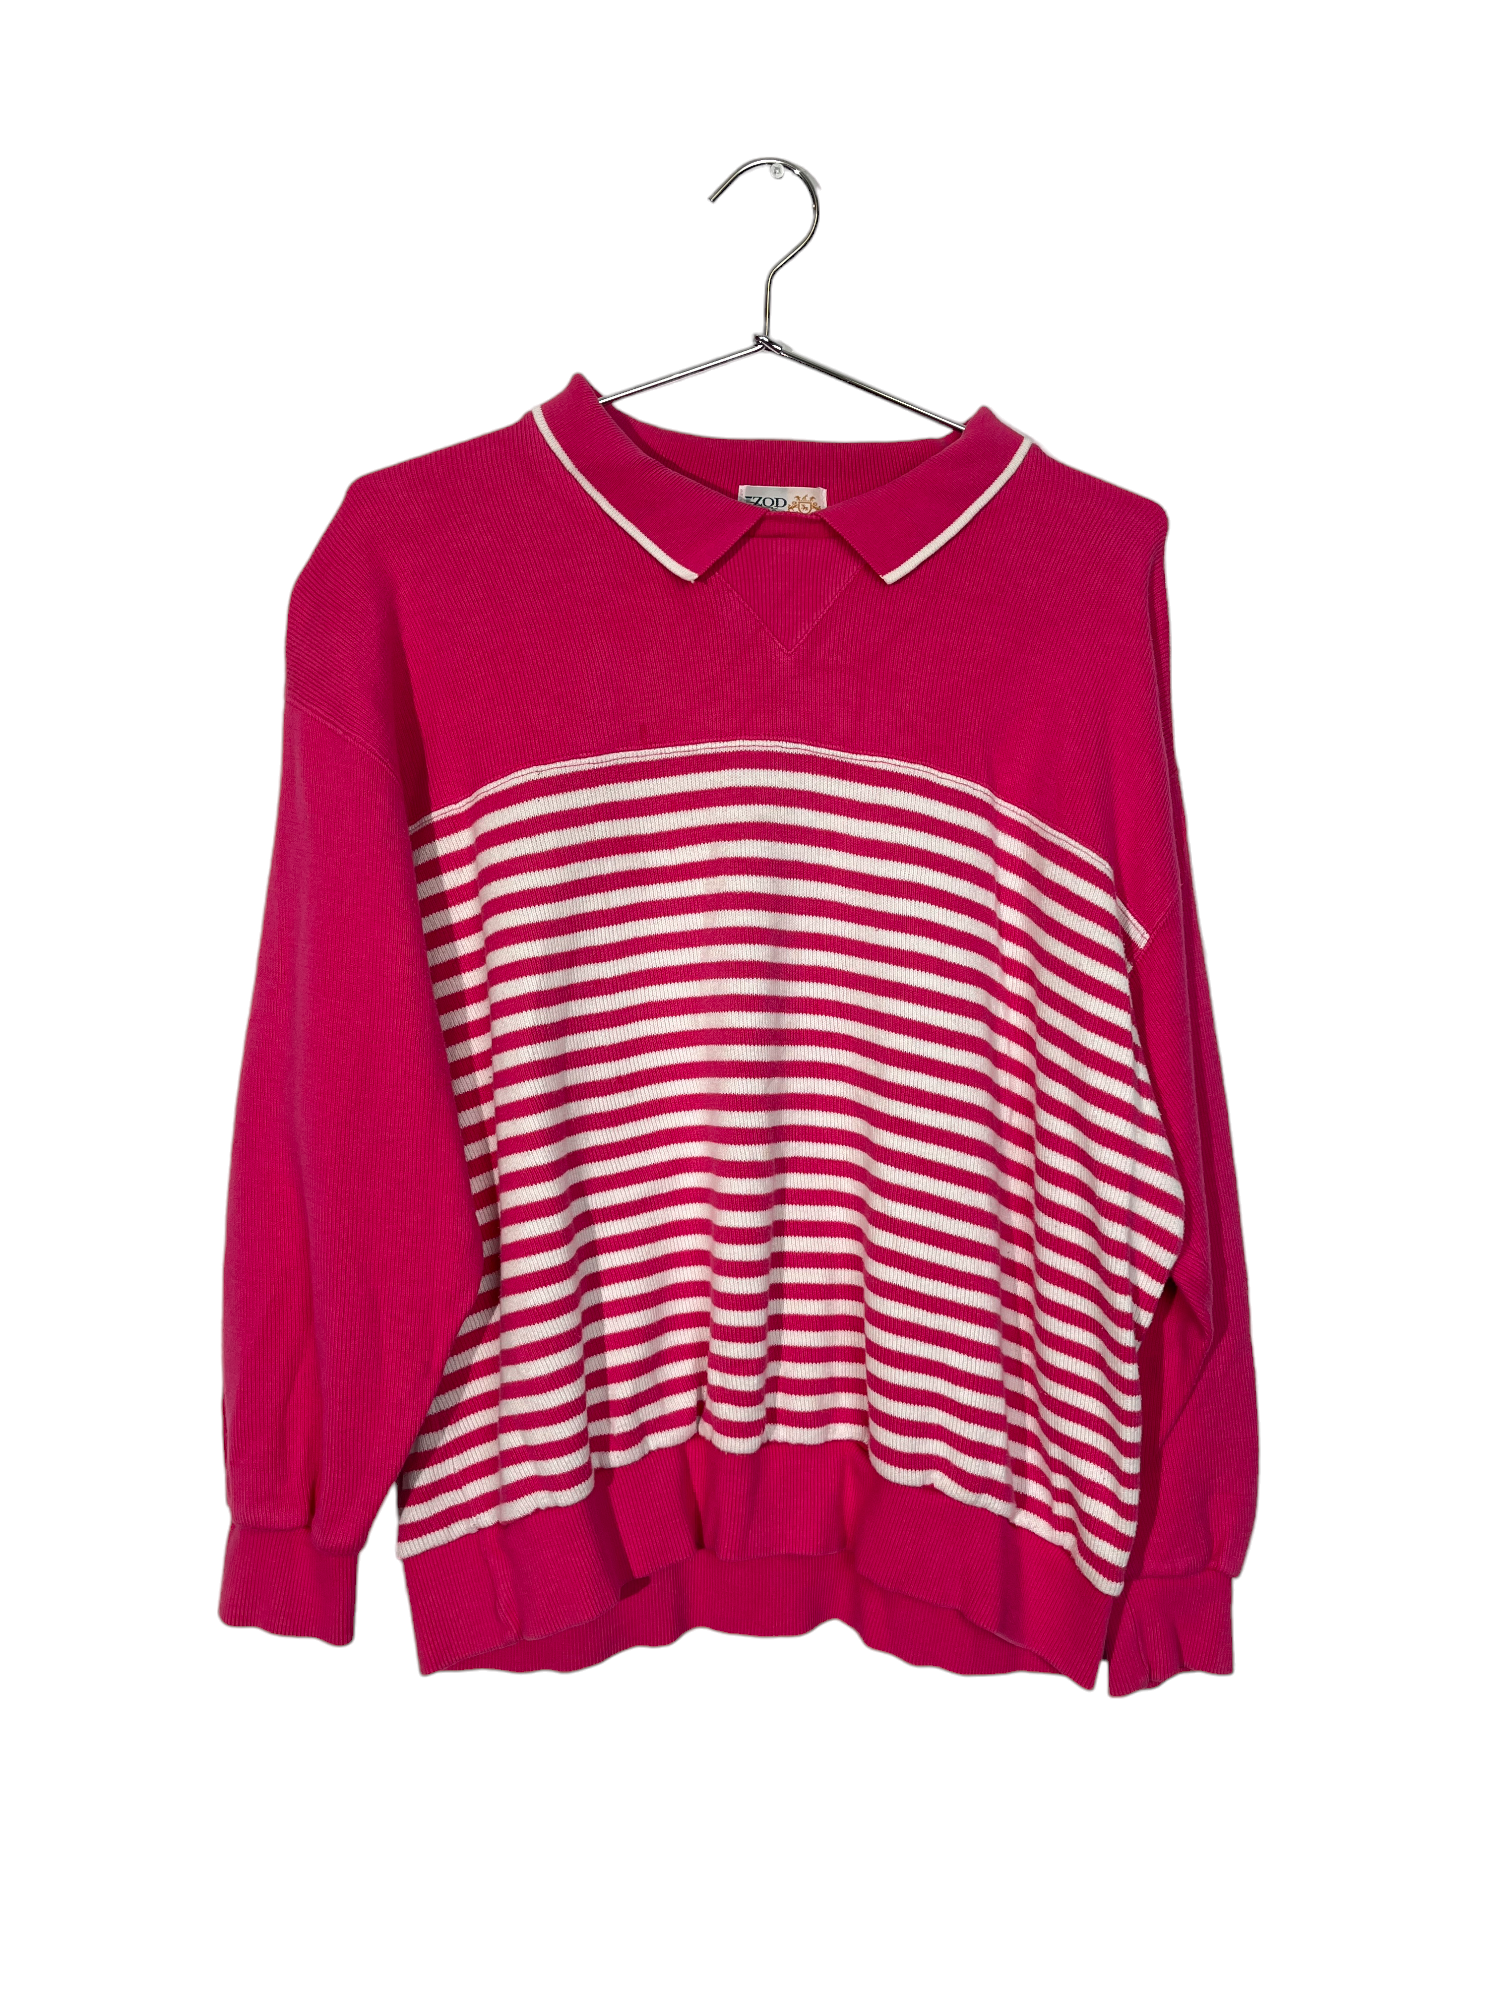 Pink & White Striped Collared Sweater